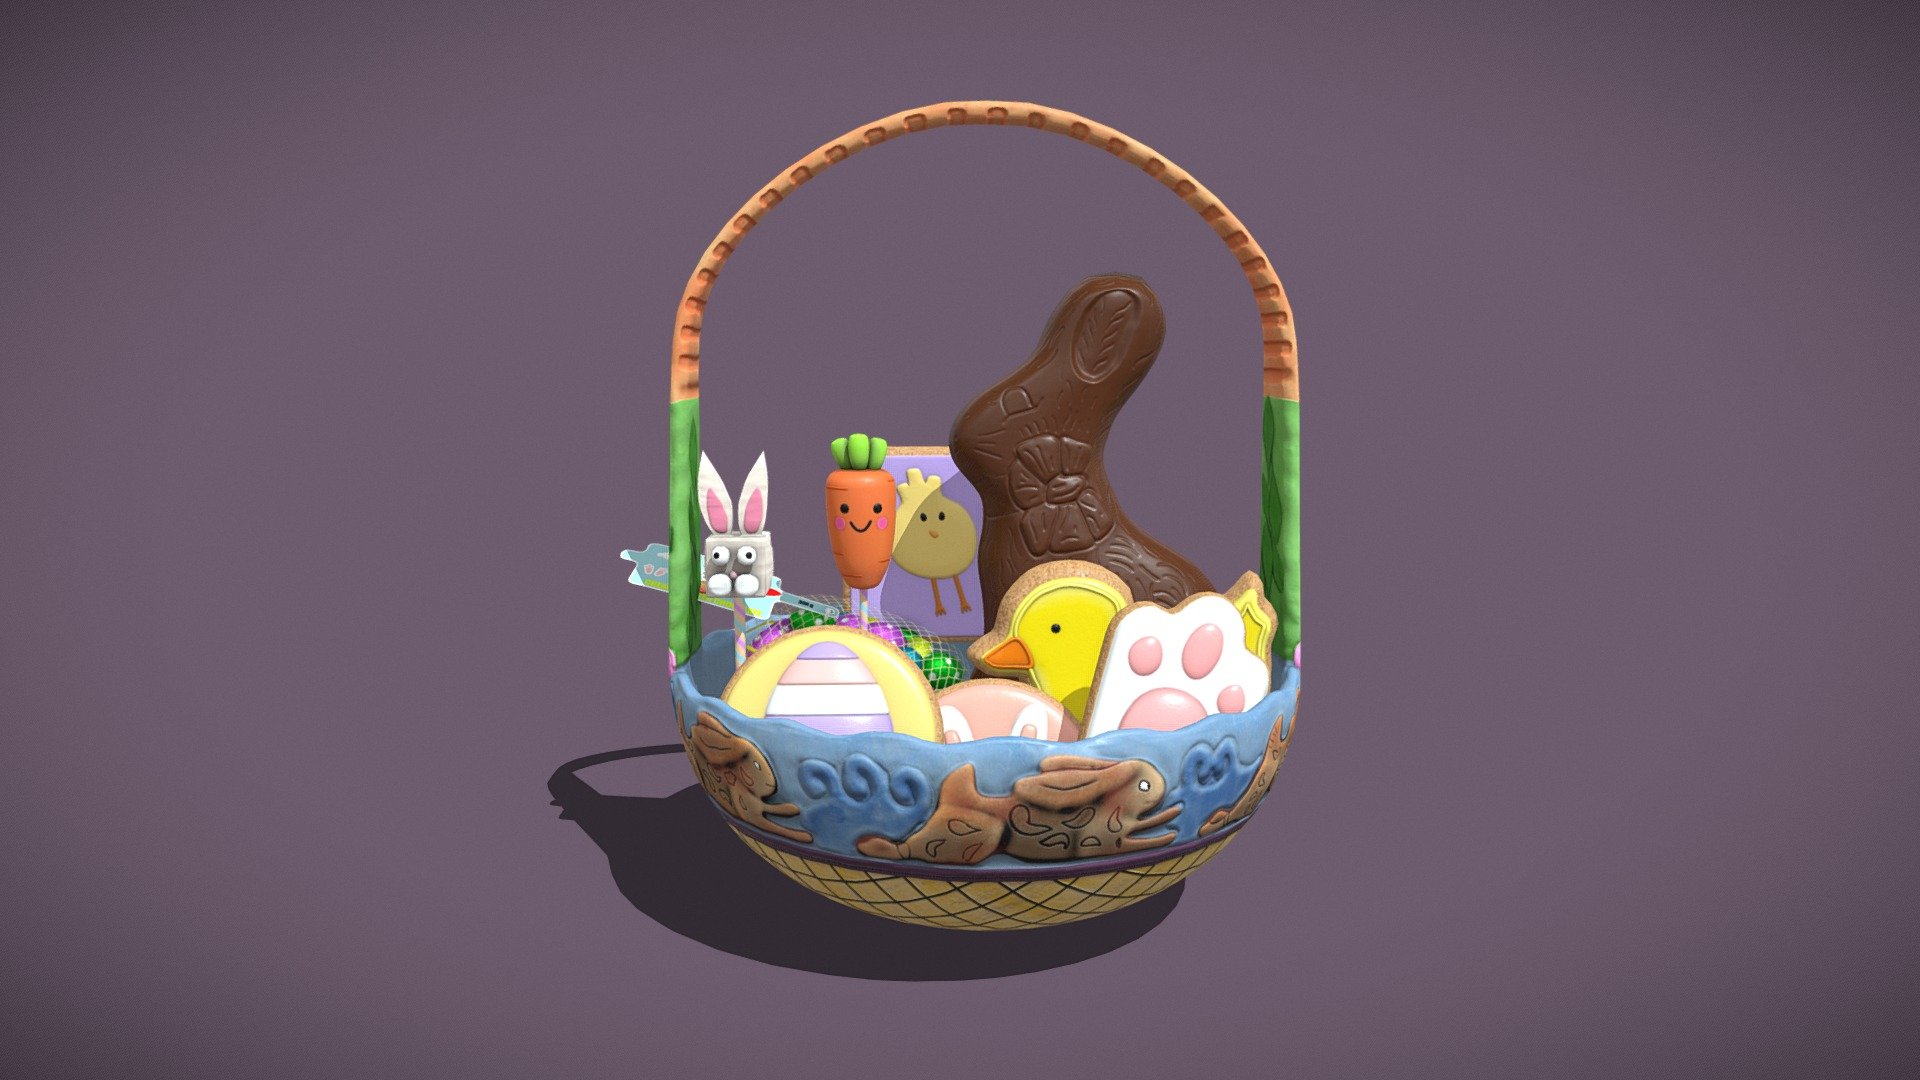 Easter Basket Mix One 3D Models PBR - 4K TexturePNG - FBX
From the Creators at Get Dead Entertainment. Please like and Rate! Follow us on FaceBook and Instagram to keep updated on all our newest models 3d model